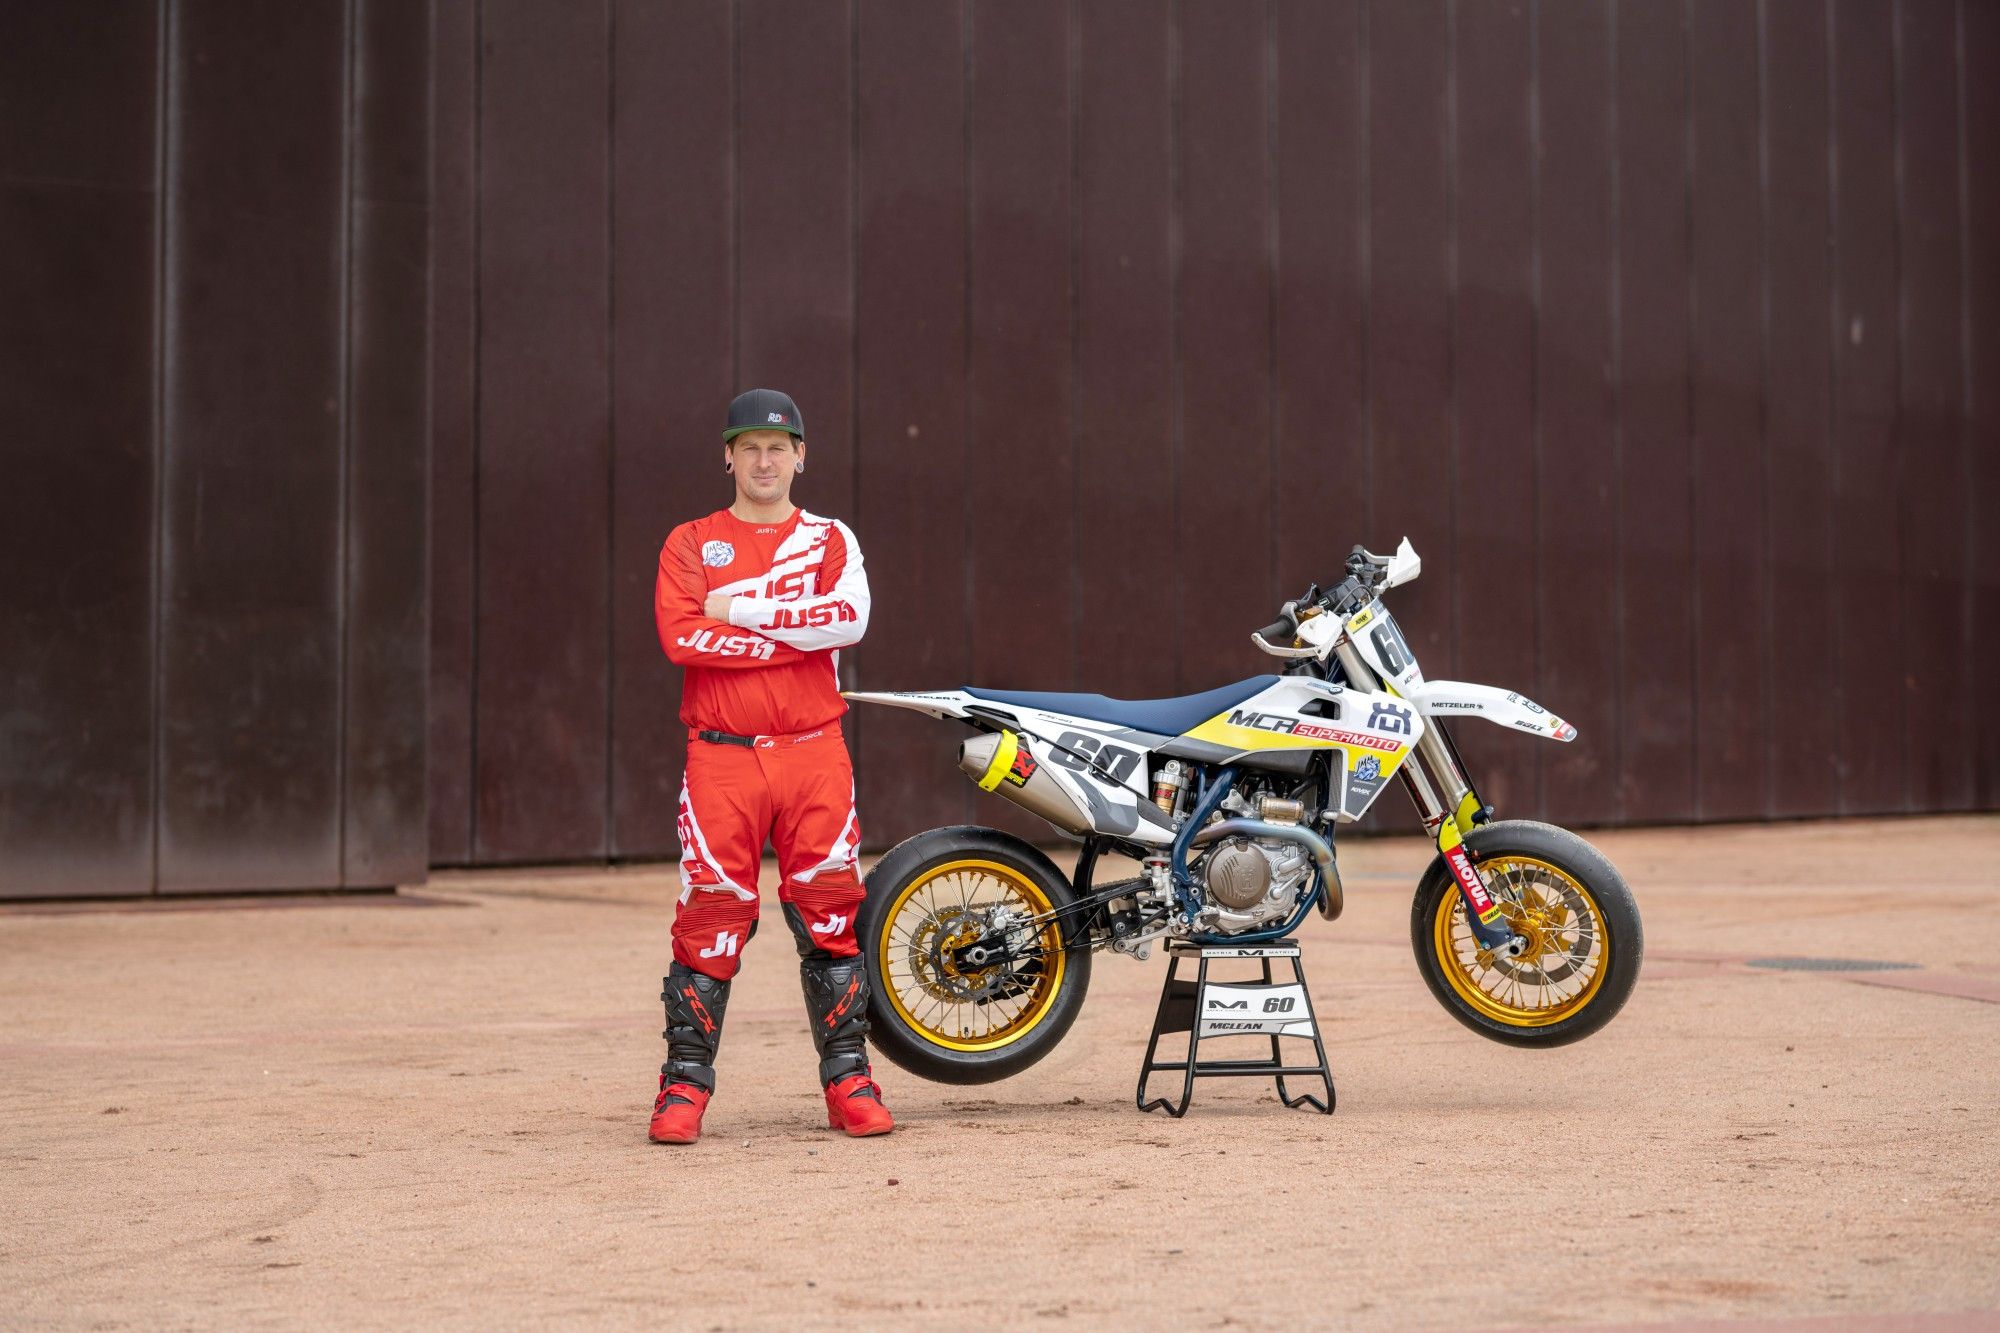 Joshua Mclean, a native of Horsham and the 2022 AMA Pro Supermoto Champion, is all set to represent the country. Photo: Henry Yates